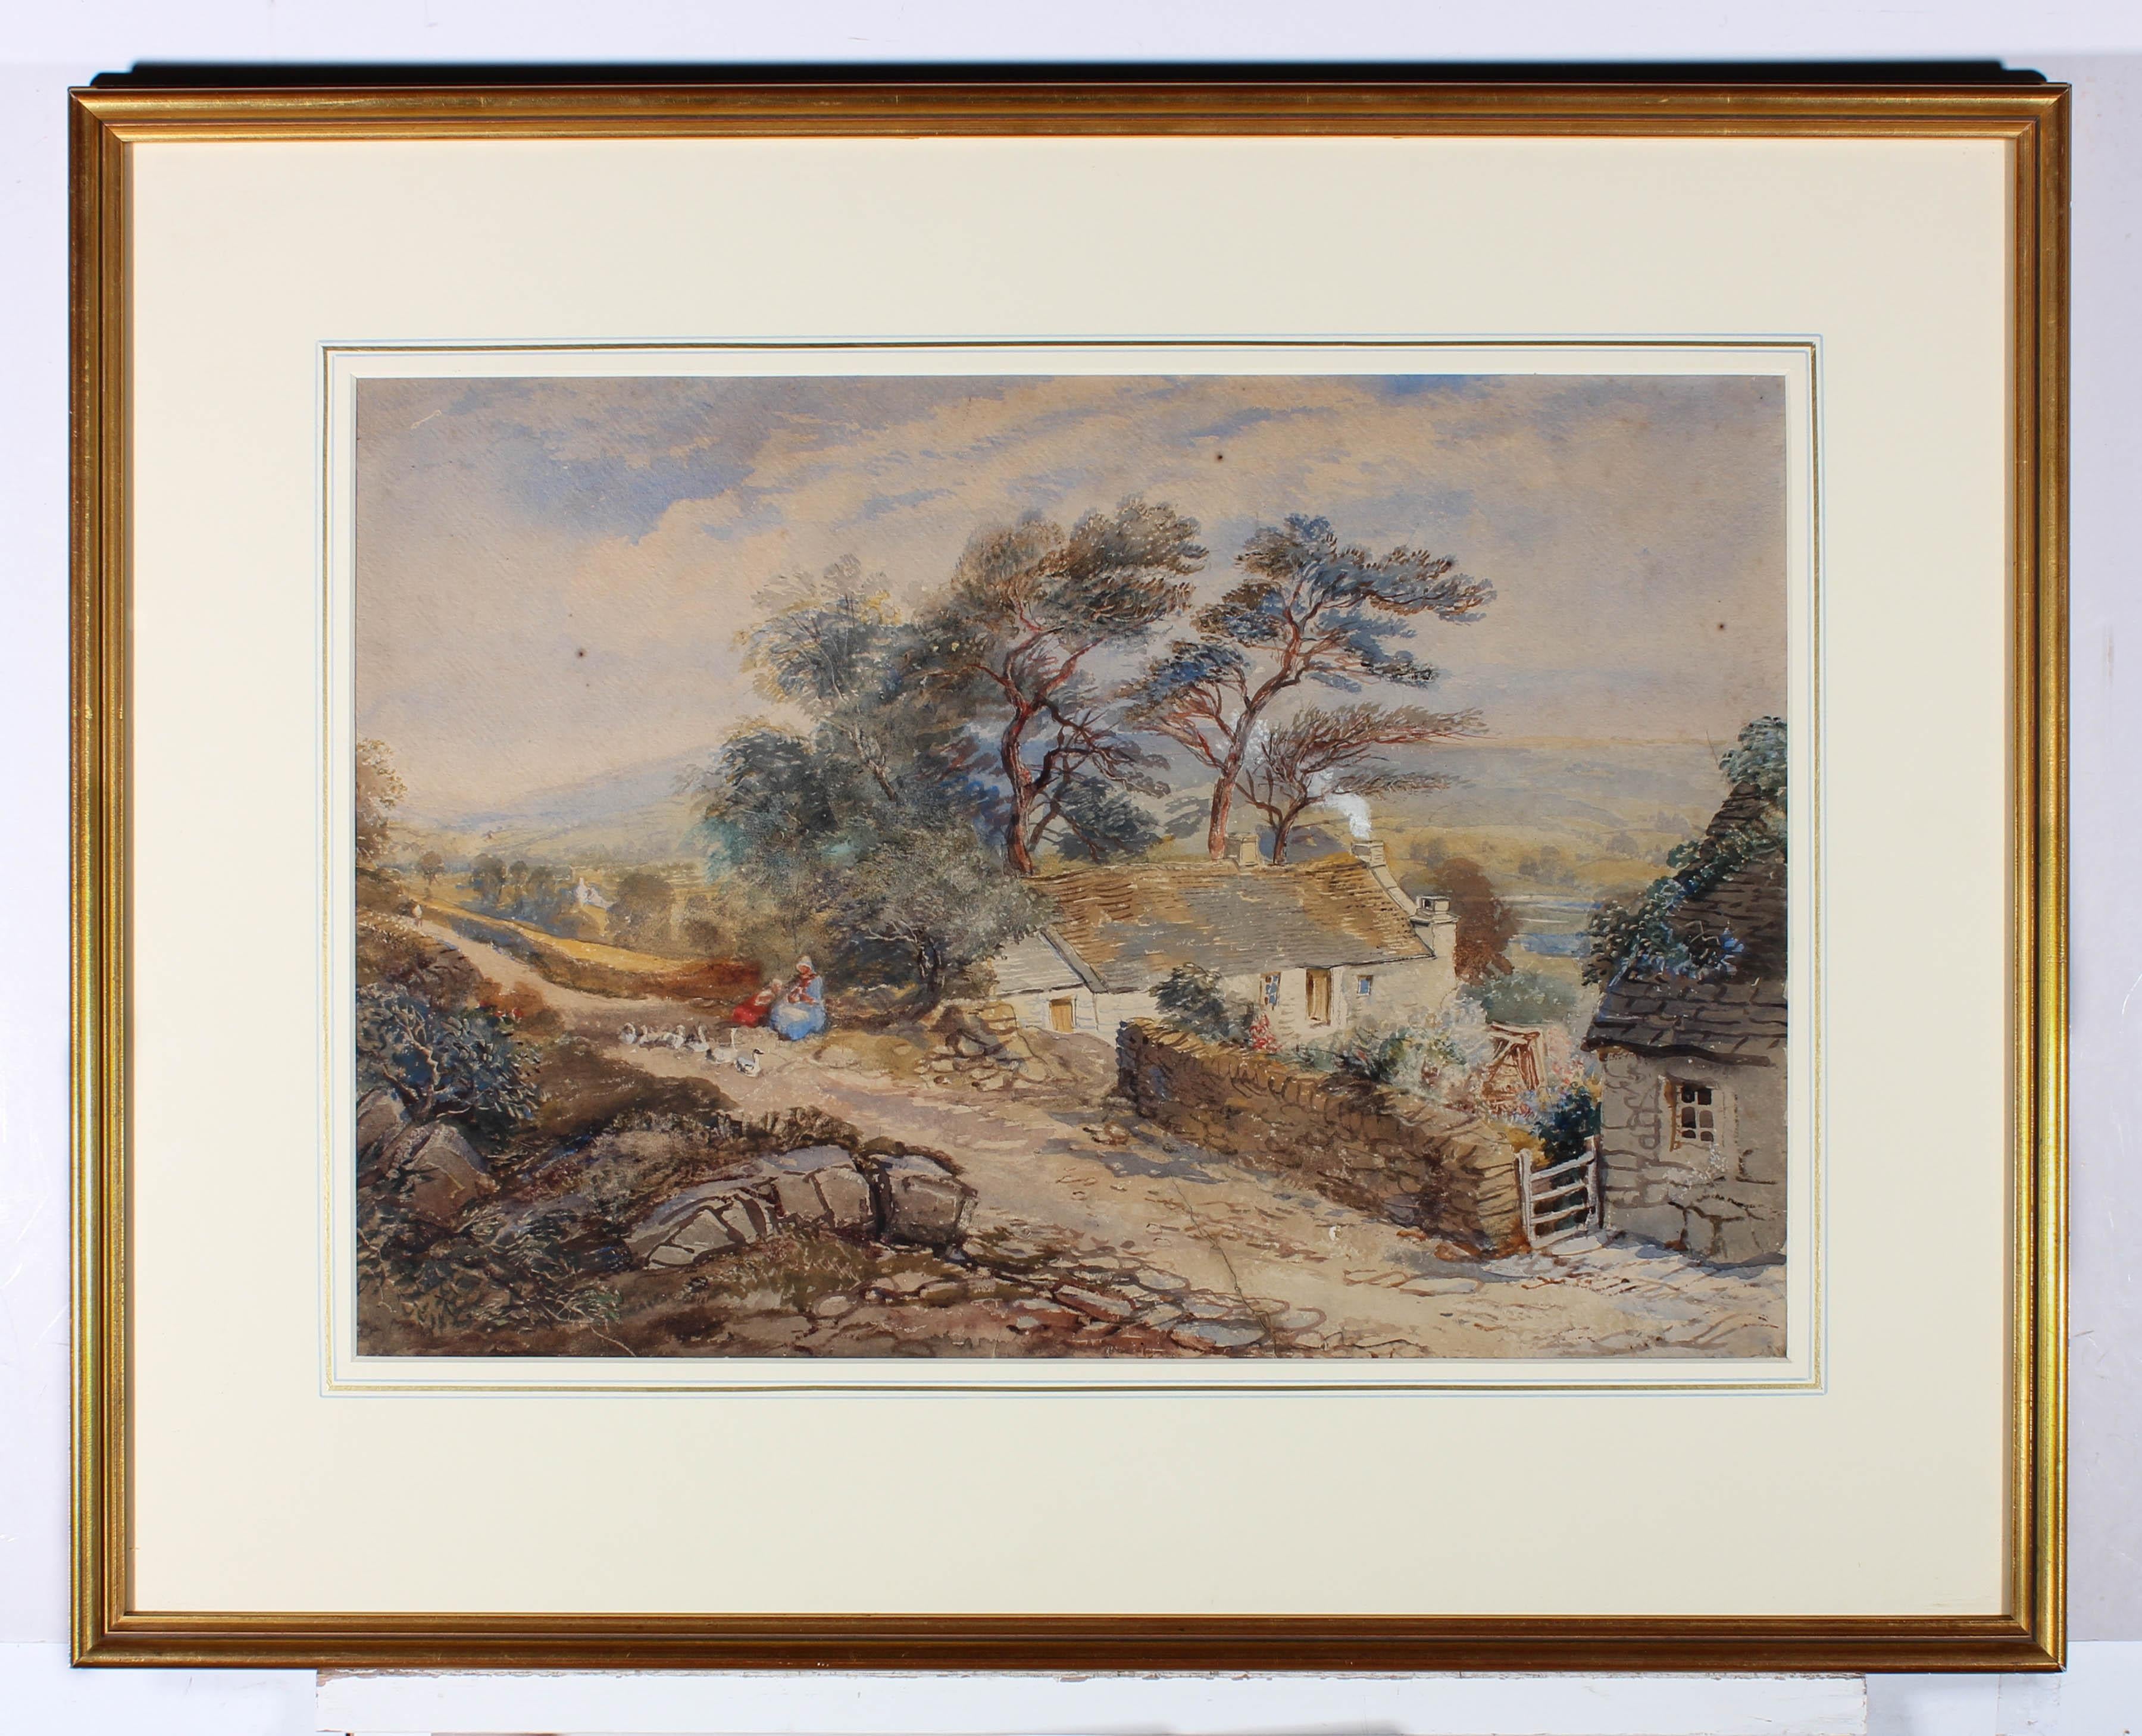 This charming study depicts a country lane with farm cottages. A mother and child feed gees and ducks on the cobblestones before vast countryside. Unsigned. Presented in a glazed gilt frame with a white card mount. On There are some light foxing